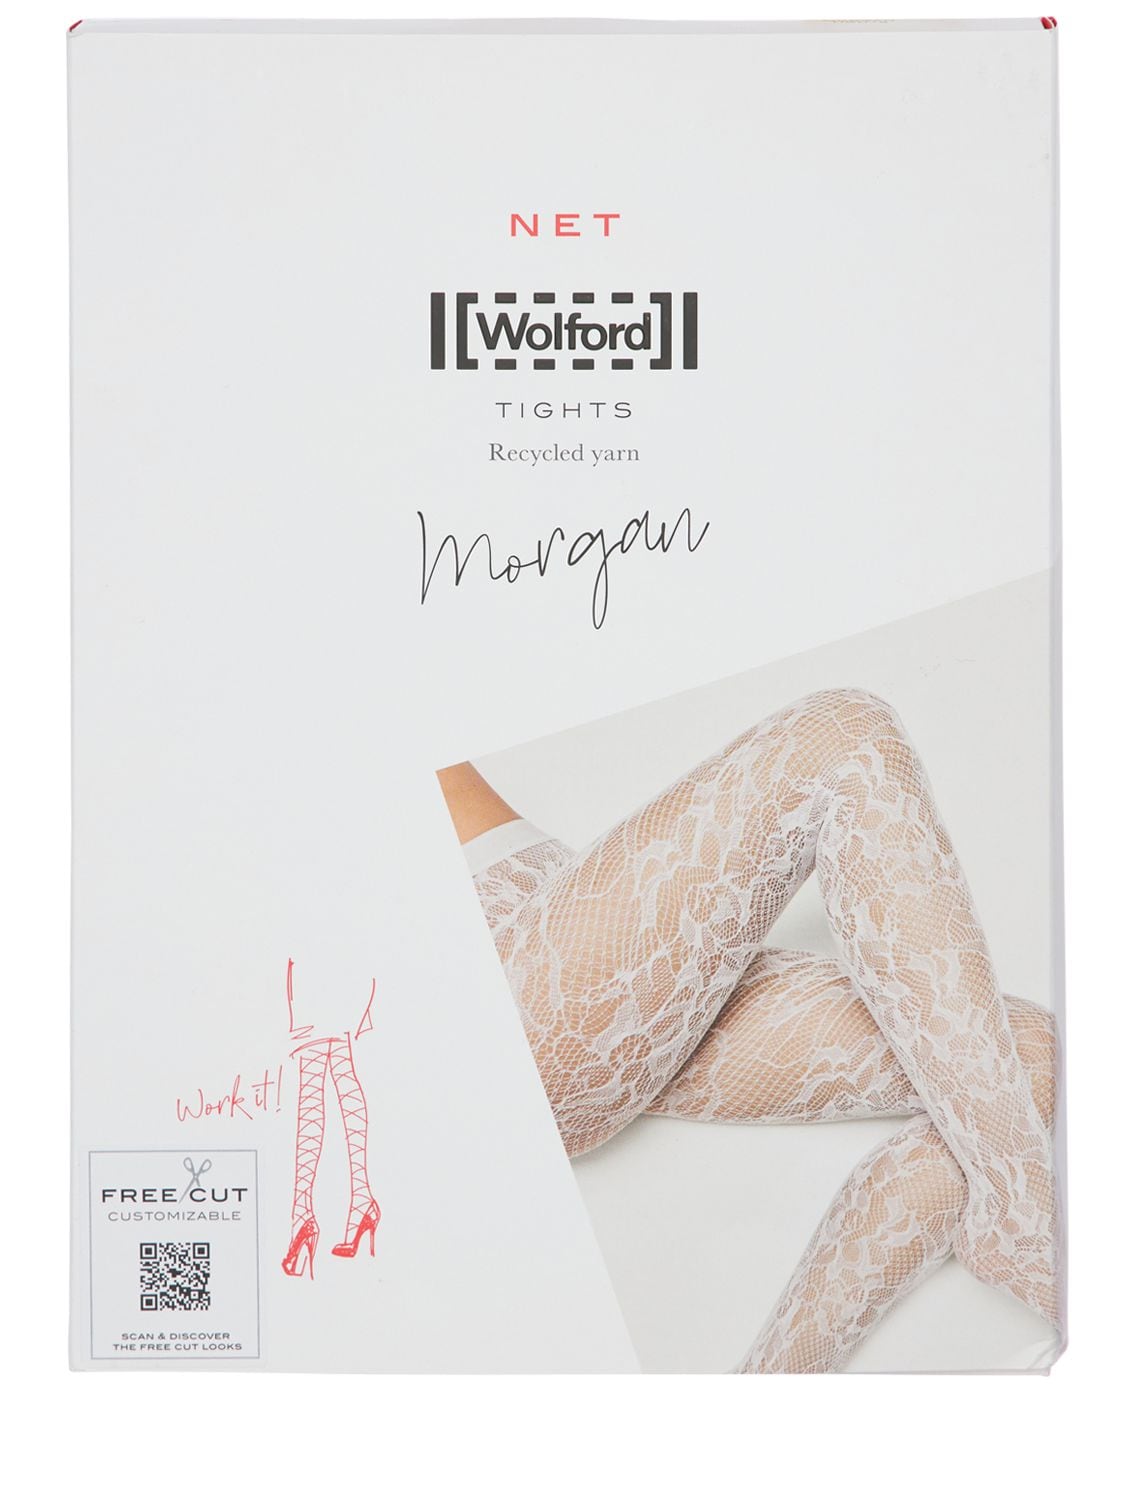 WOLFORD MORGAN FLORAL EMBROIDERY STOCKINGS,72IVOP006-NZAWNQ2